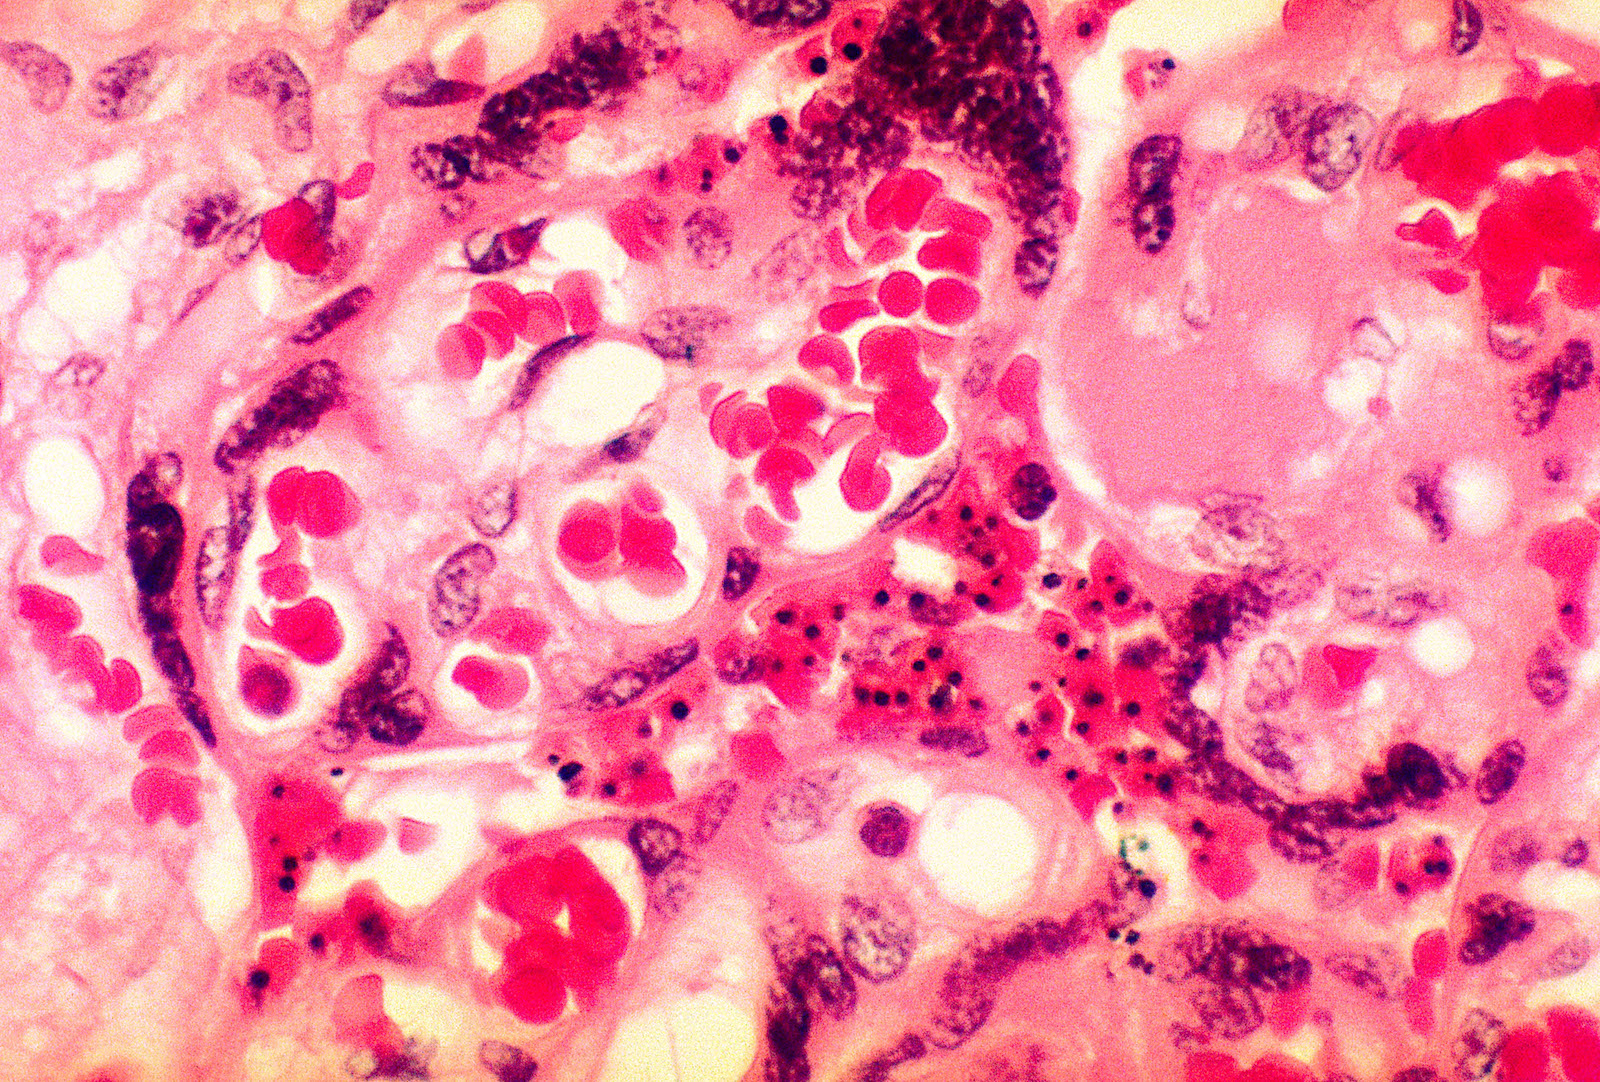 A histological slide of pink tissues and cells